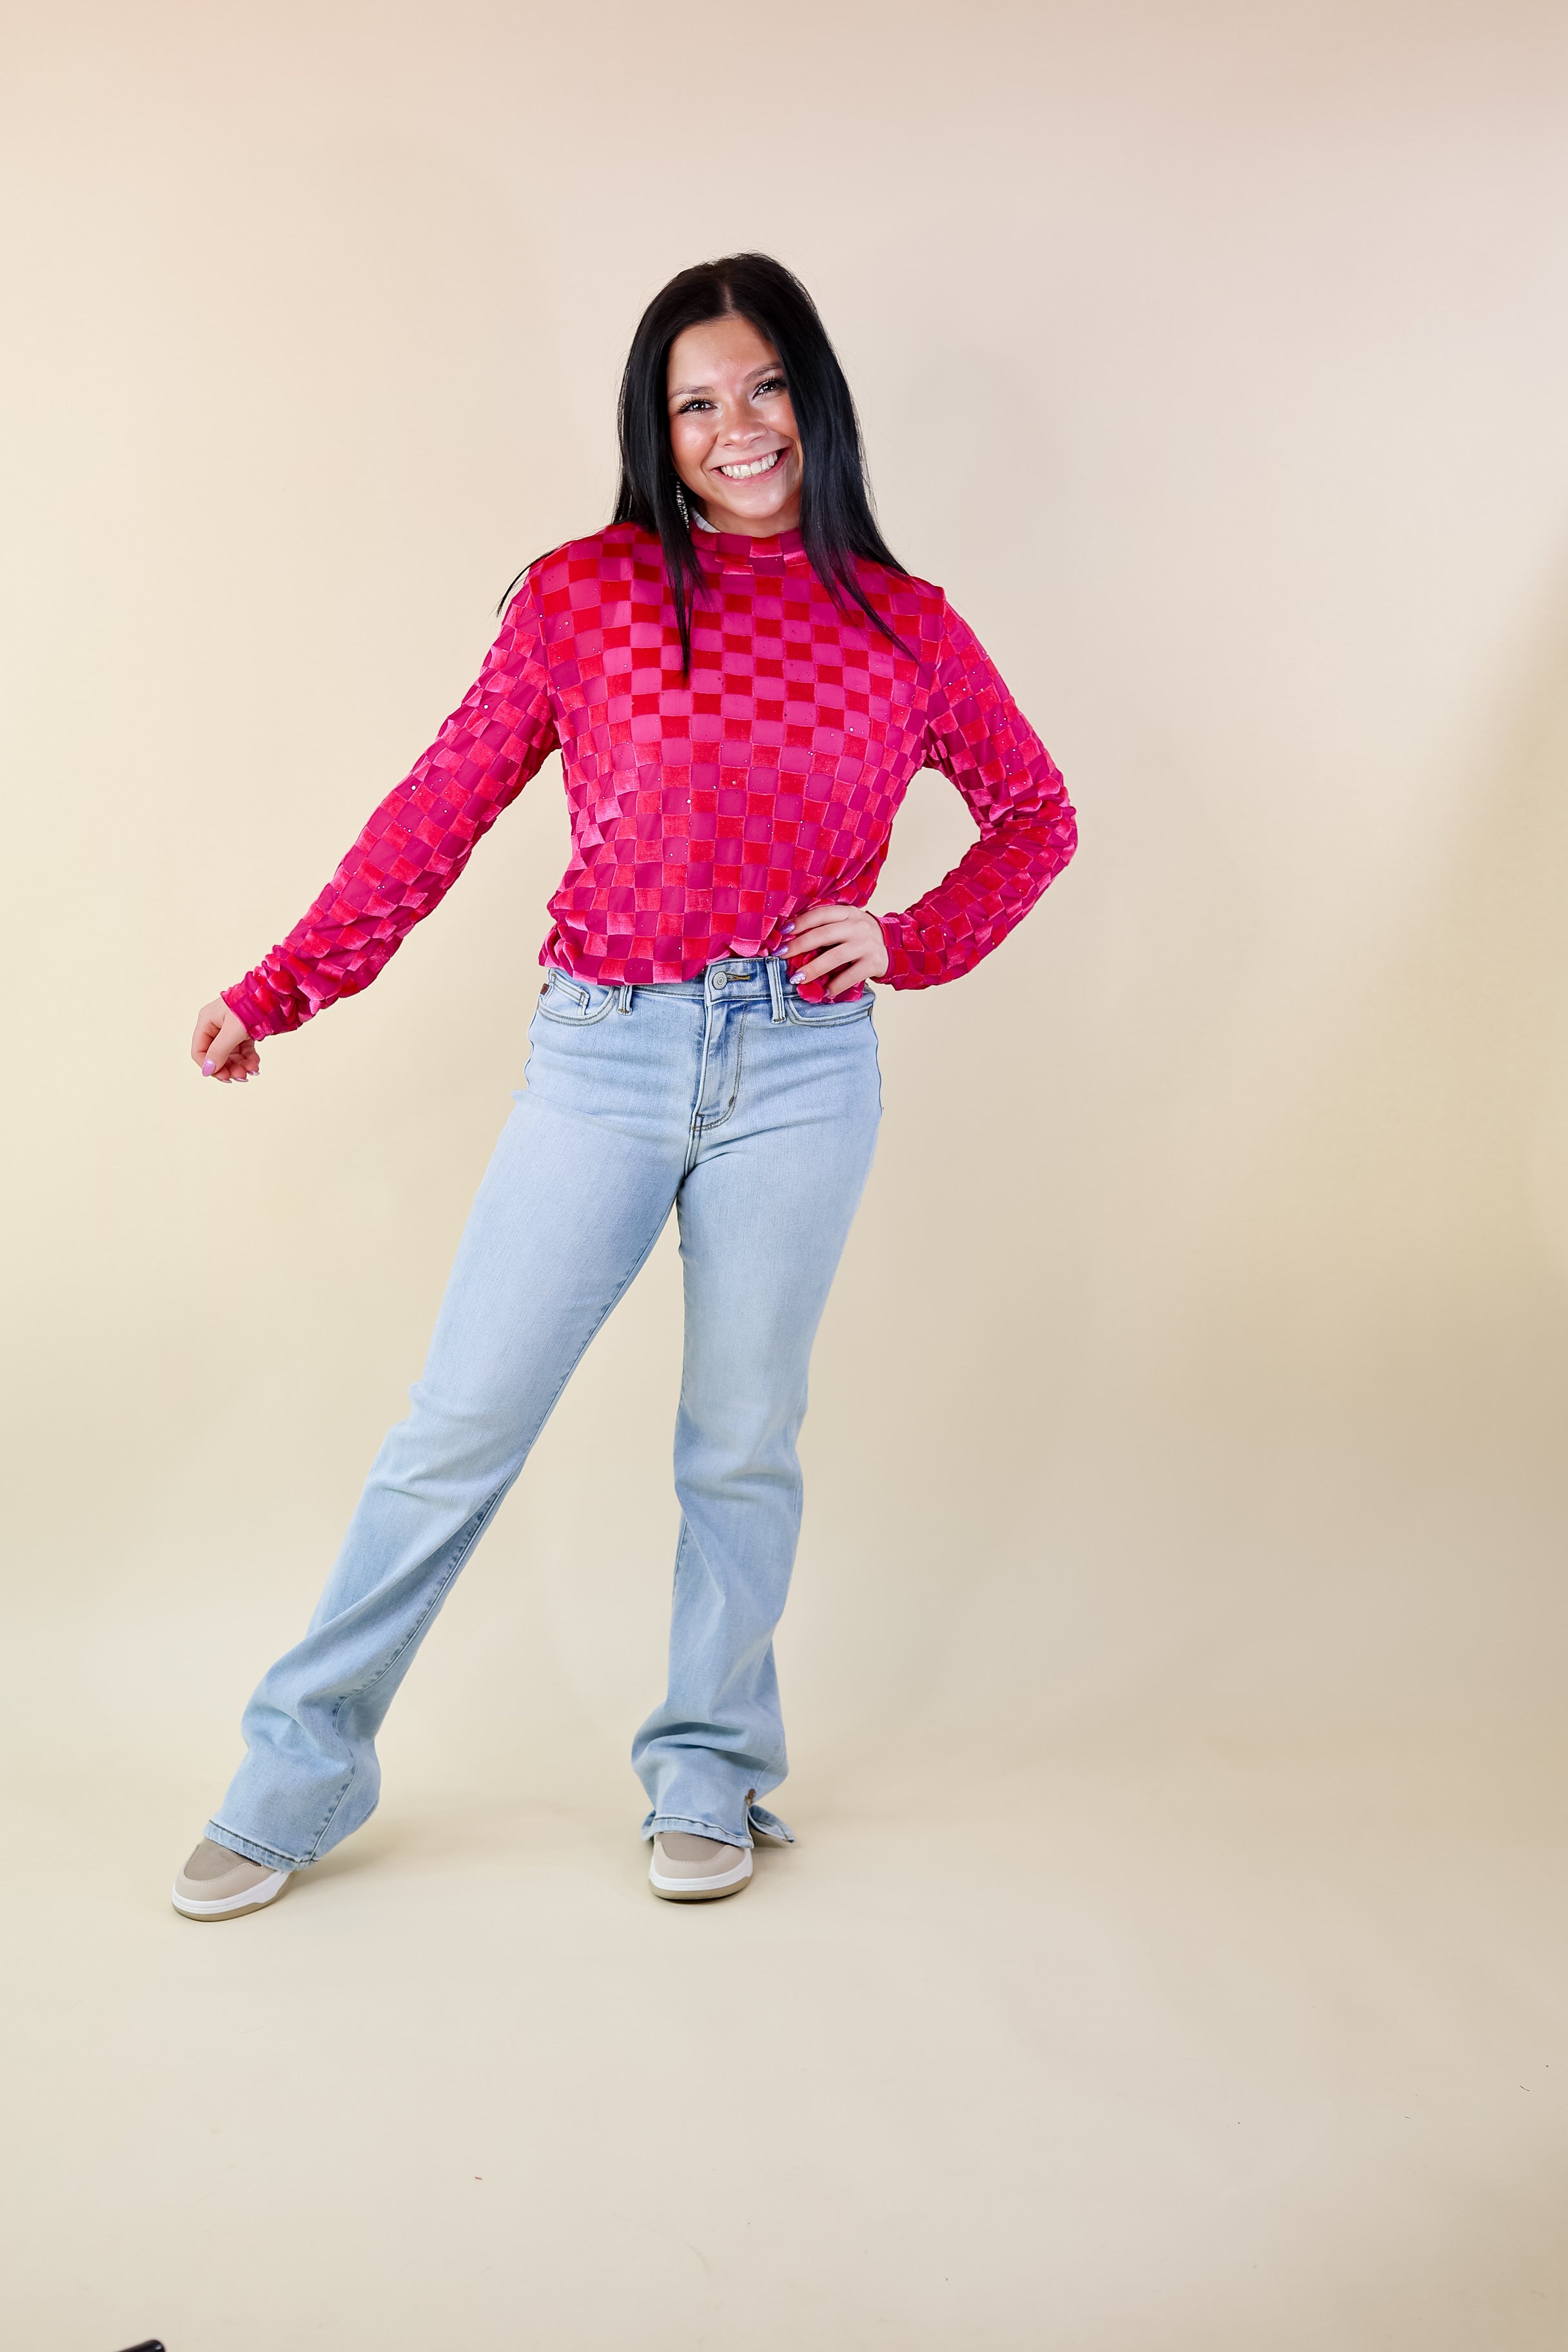 Rodeo Drive Mesh Checkered Print with Glitter Long Sleeve Top in Pink - Giddy Up Glamour Boutique